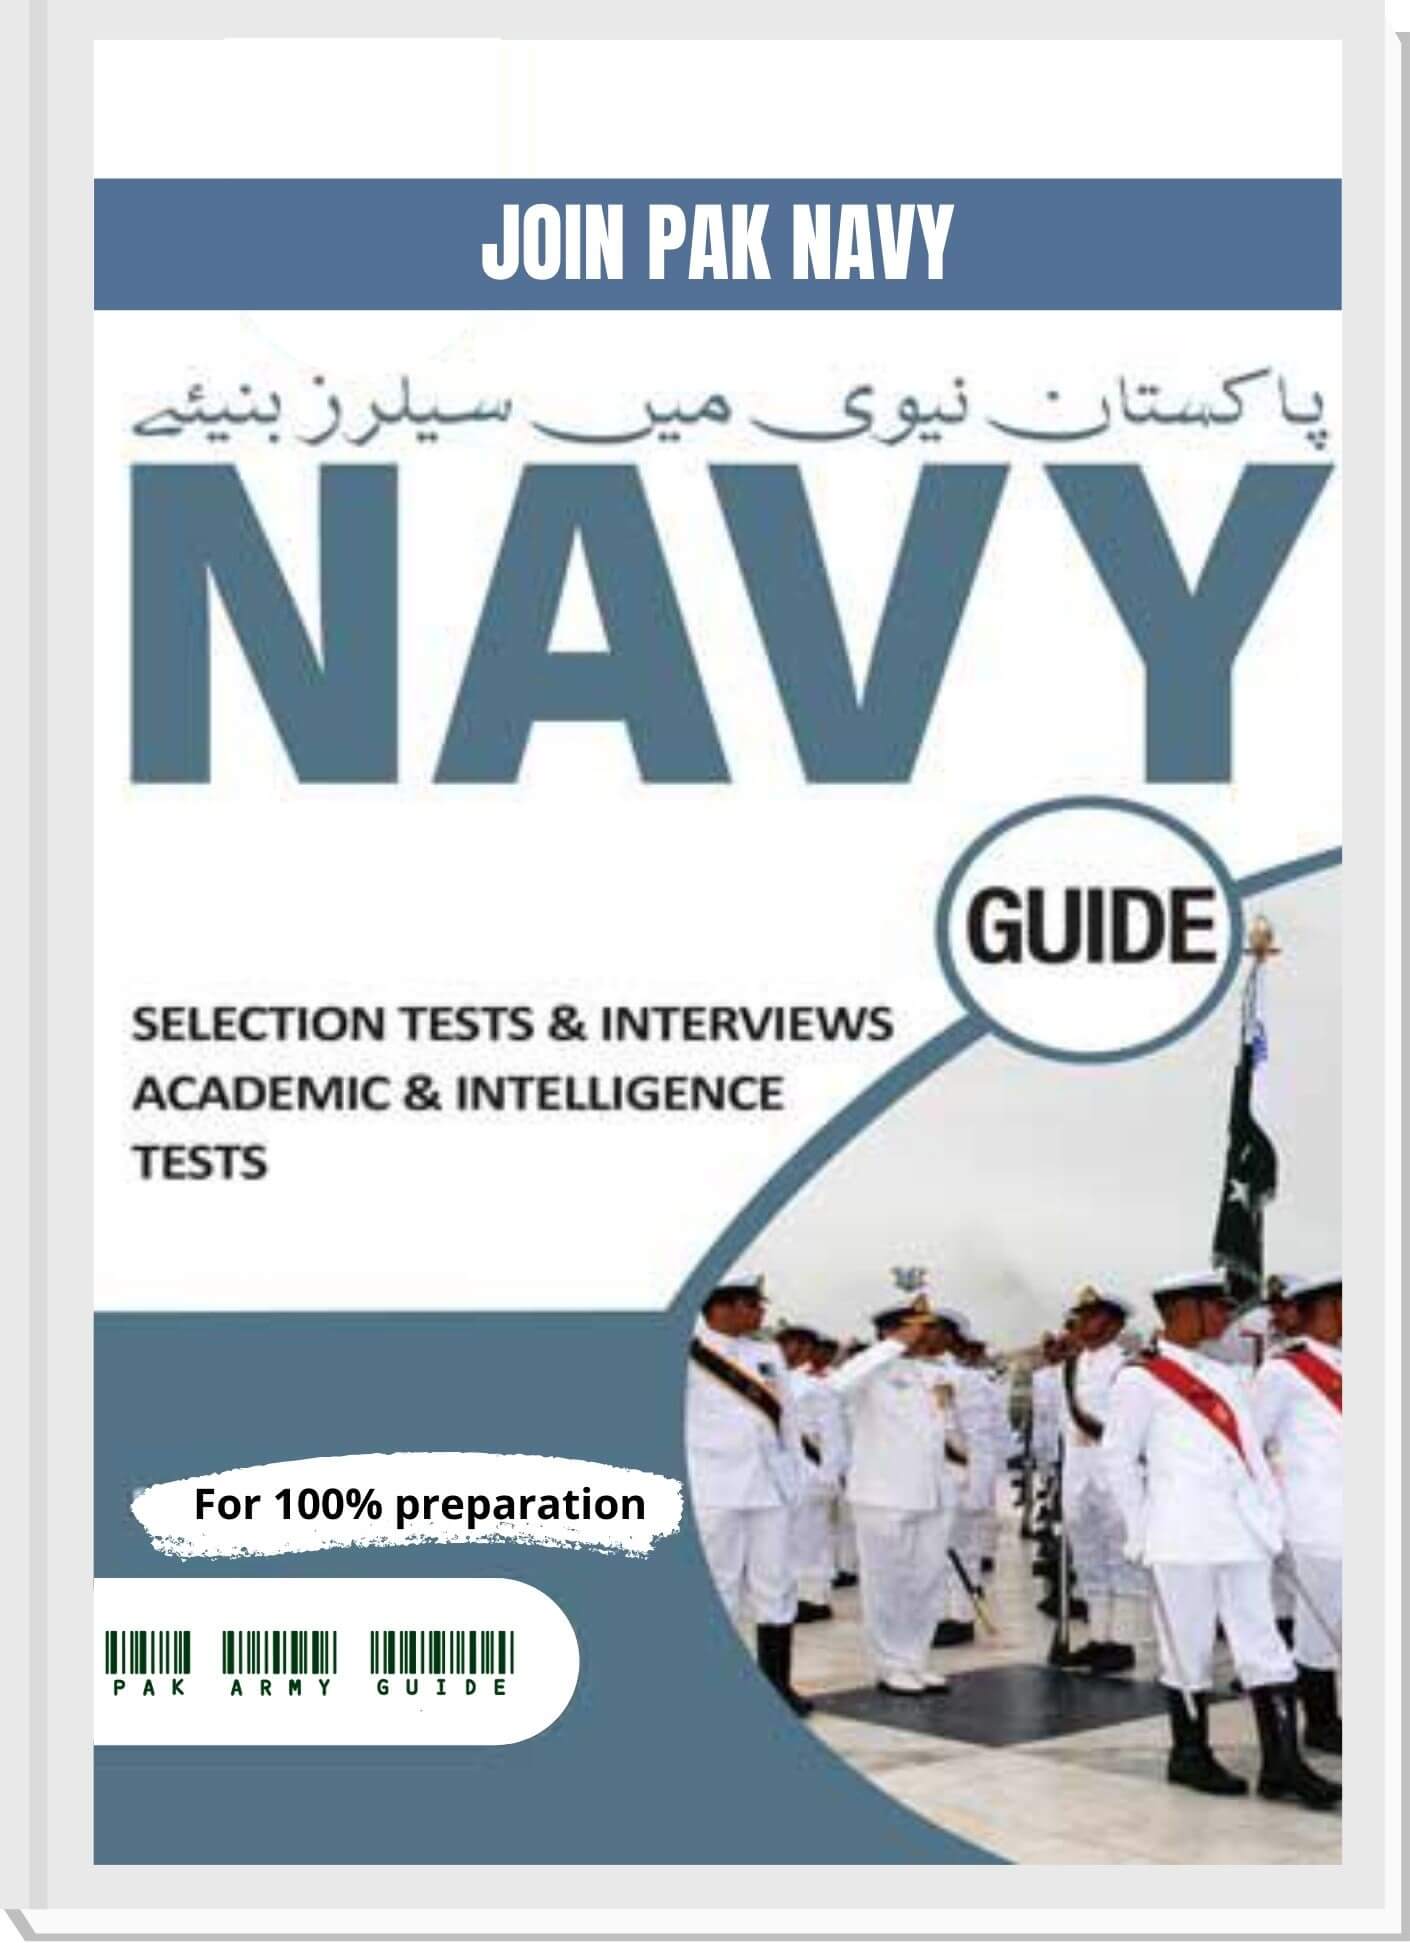 PAK NAVY GUIDE BOOK